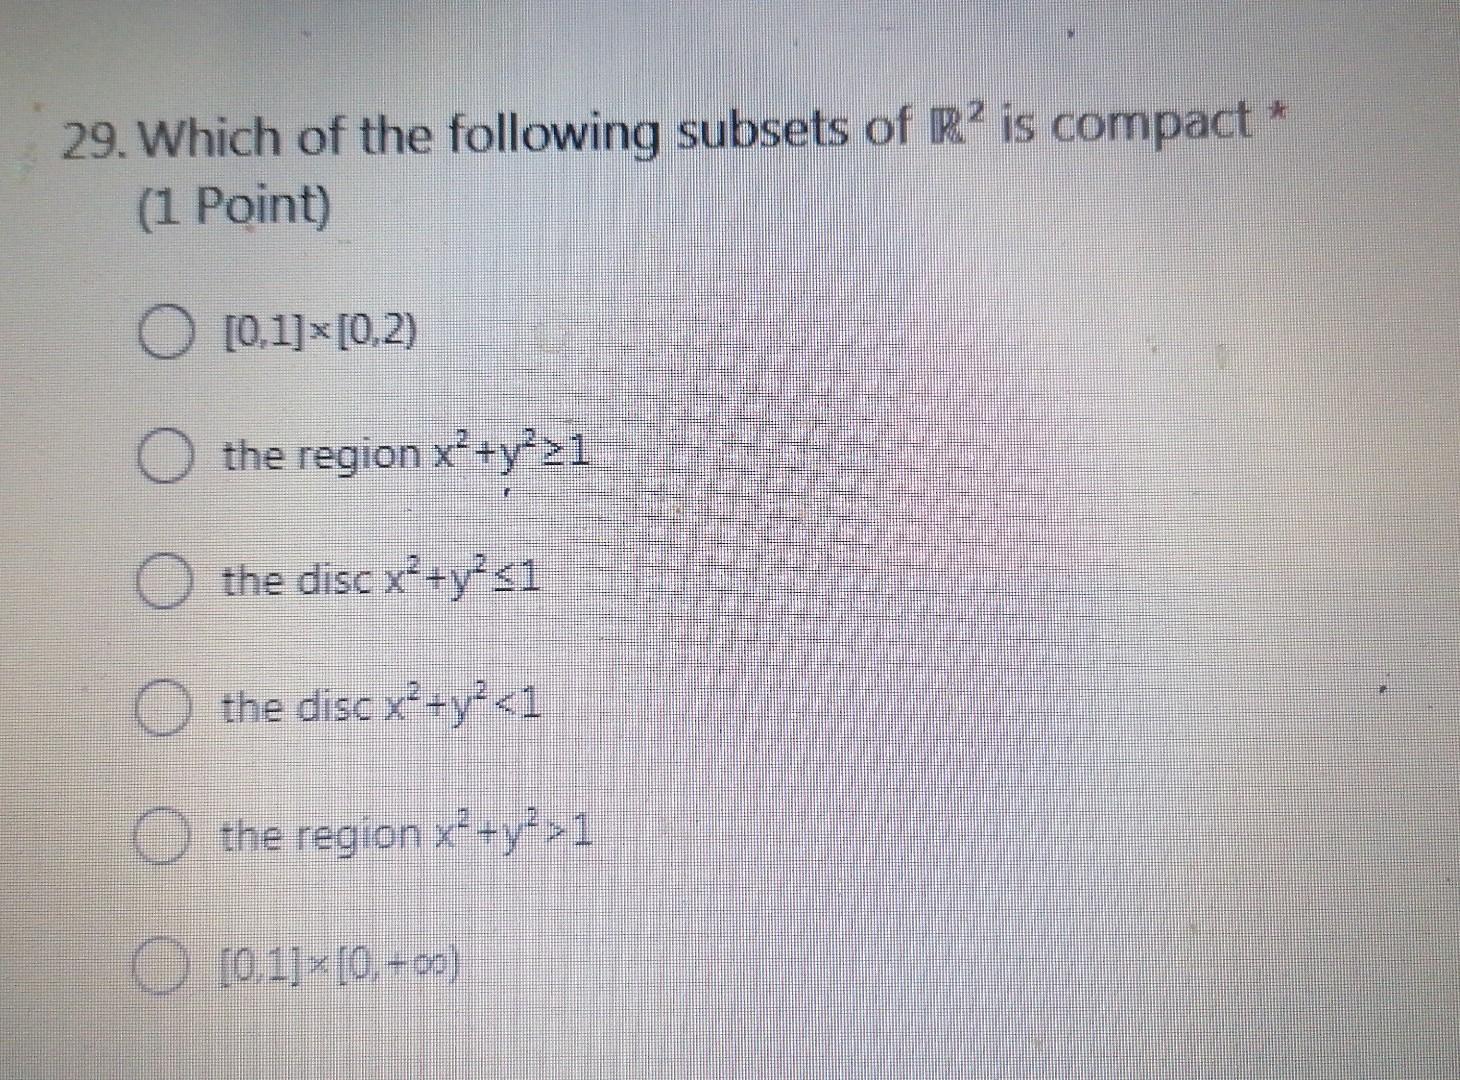 29 Which Of The Following Subsets Of R Is Compact 1 Point 0 1 0 2 The Region X Y 1 The Disc X Y 1 O The Disc 1